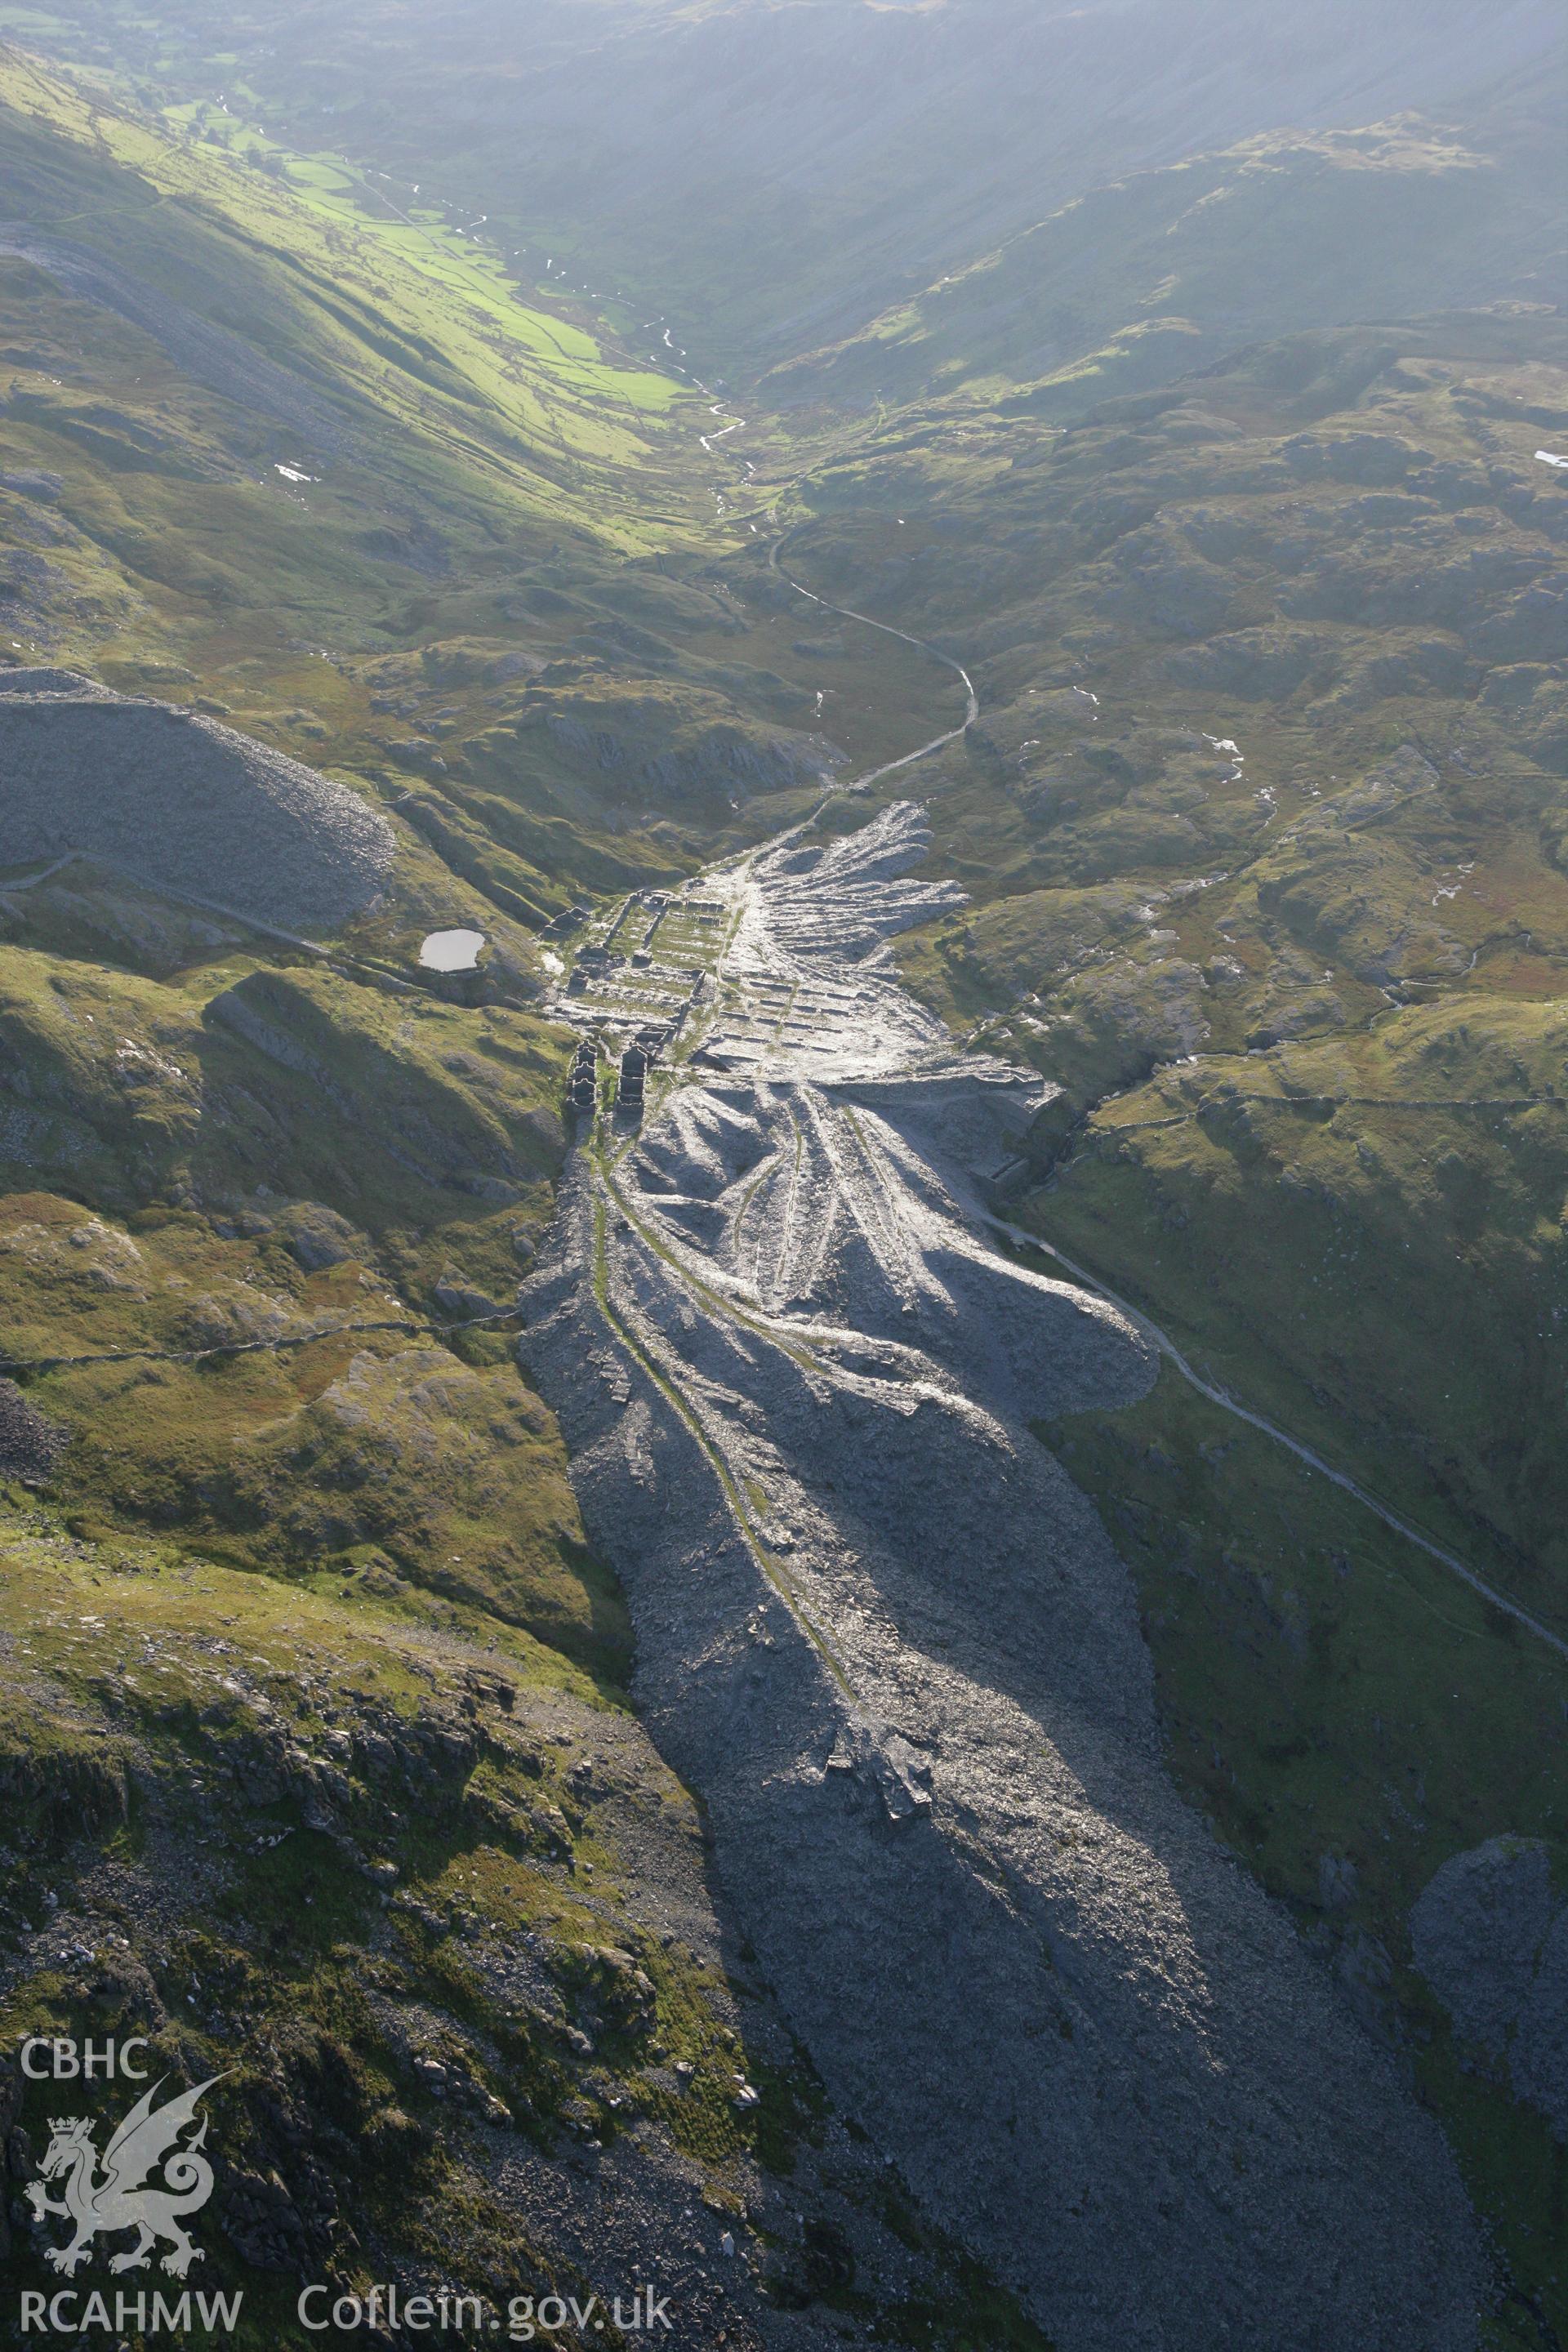 RCAHMW colour oblique aerial photograph of Rhosydd Slate Quarry. Taken on 06 September 2007 by Toby Driver